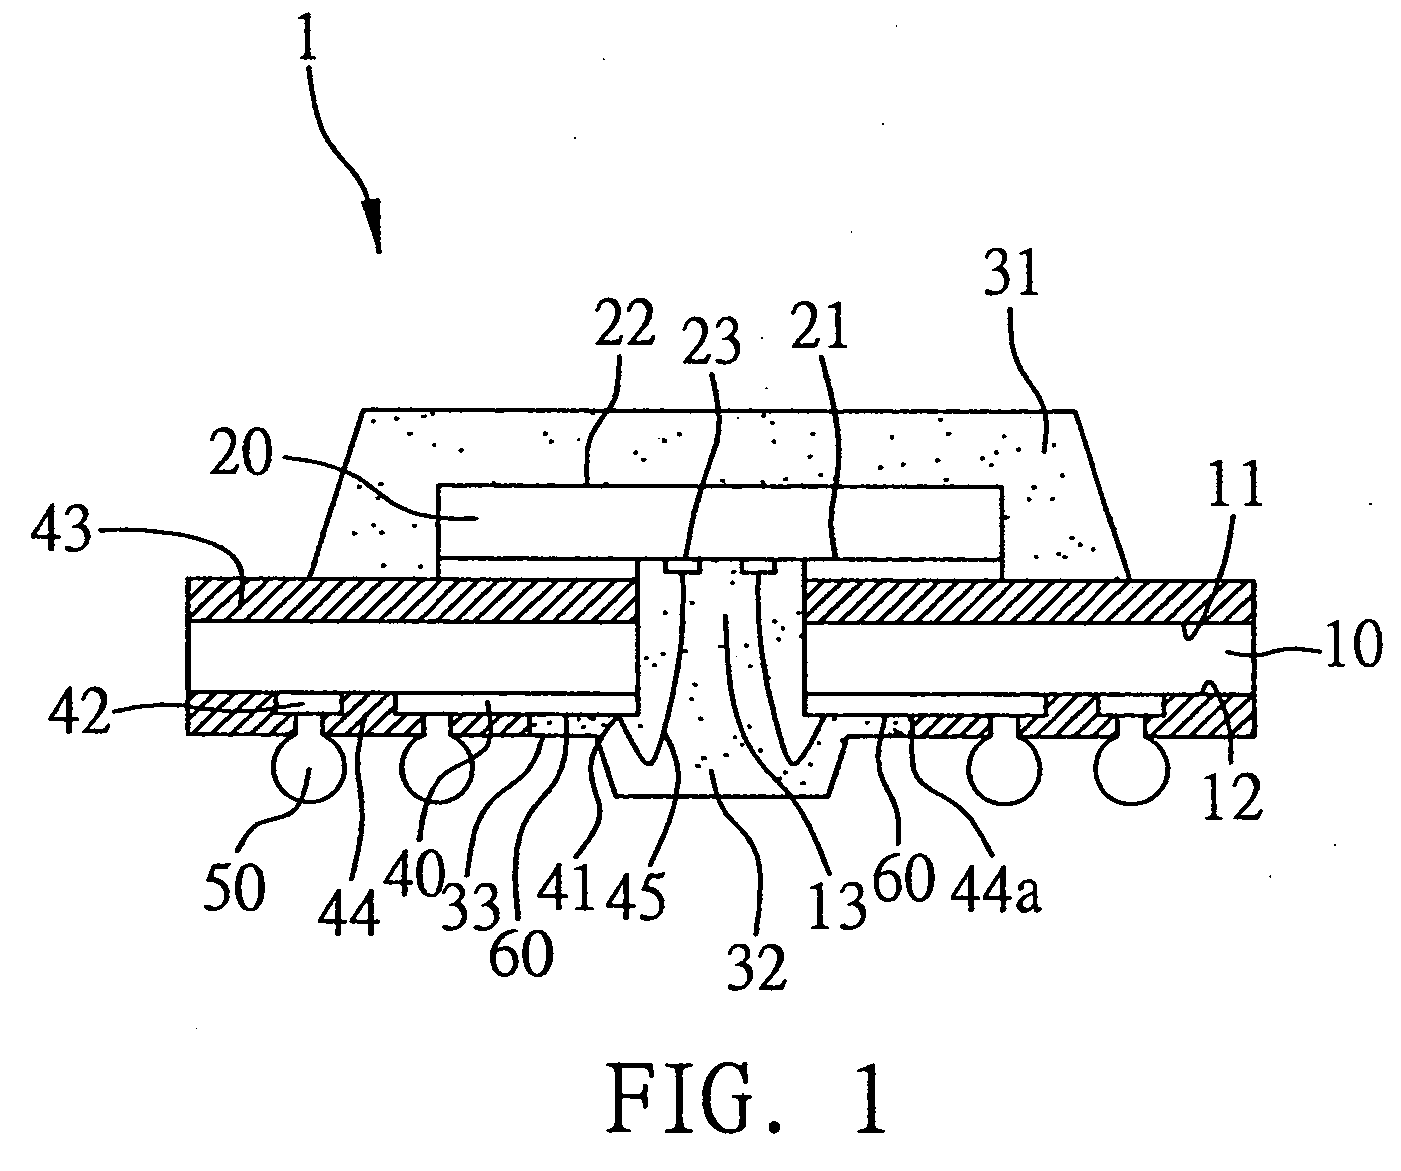 Method for fabricating a flash-preventing window ball grid array semiconductor package